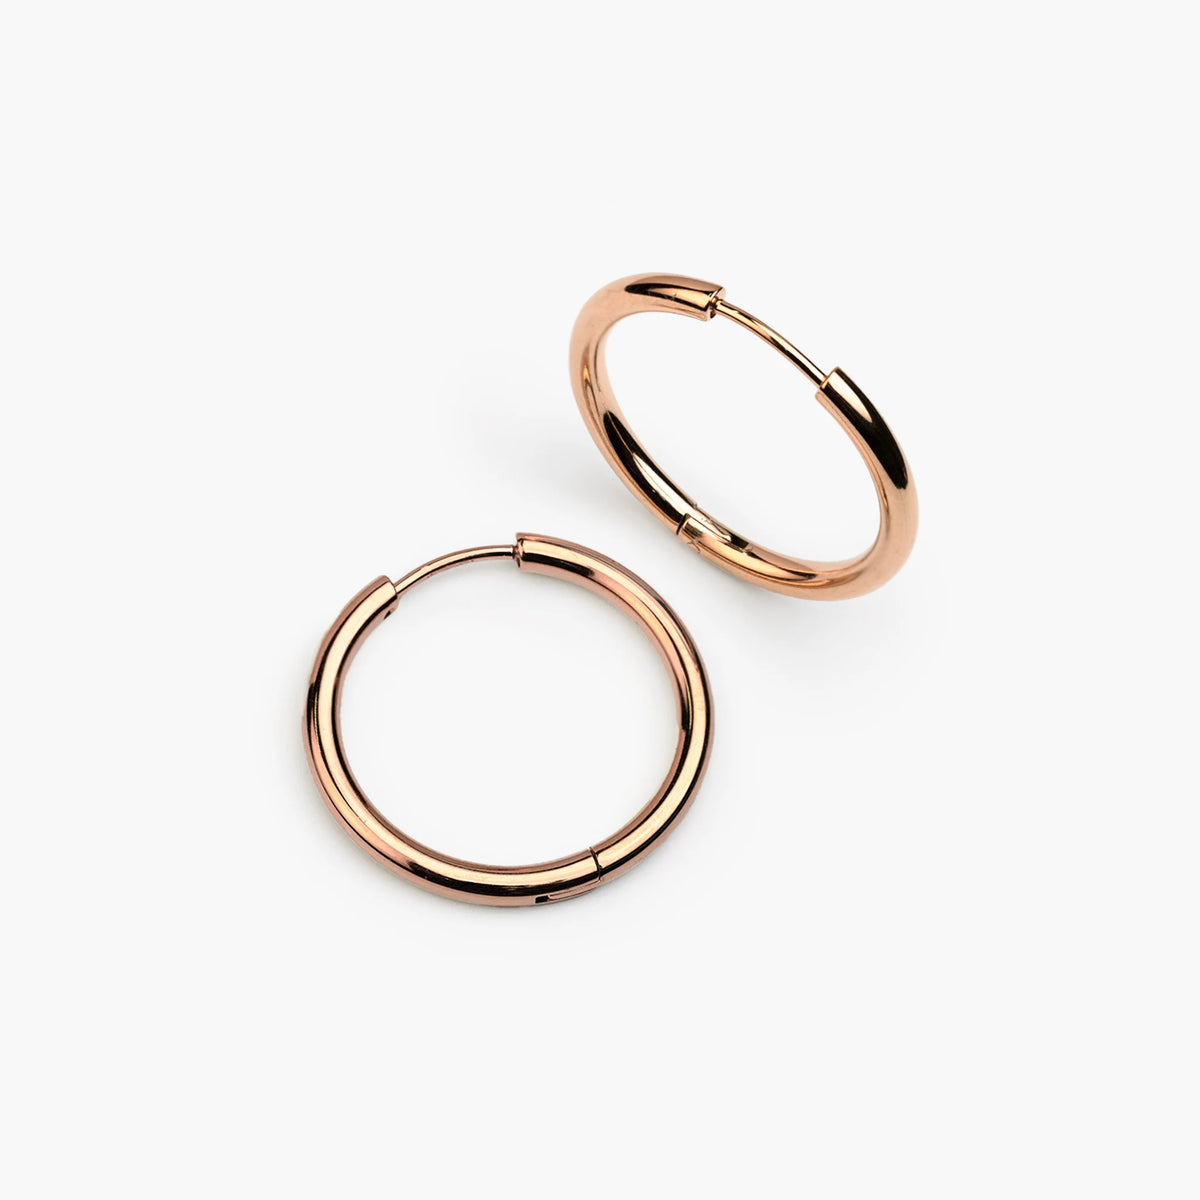 Mix & Match hoop earrings stainless steel 25mm | Rose gold